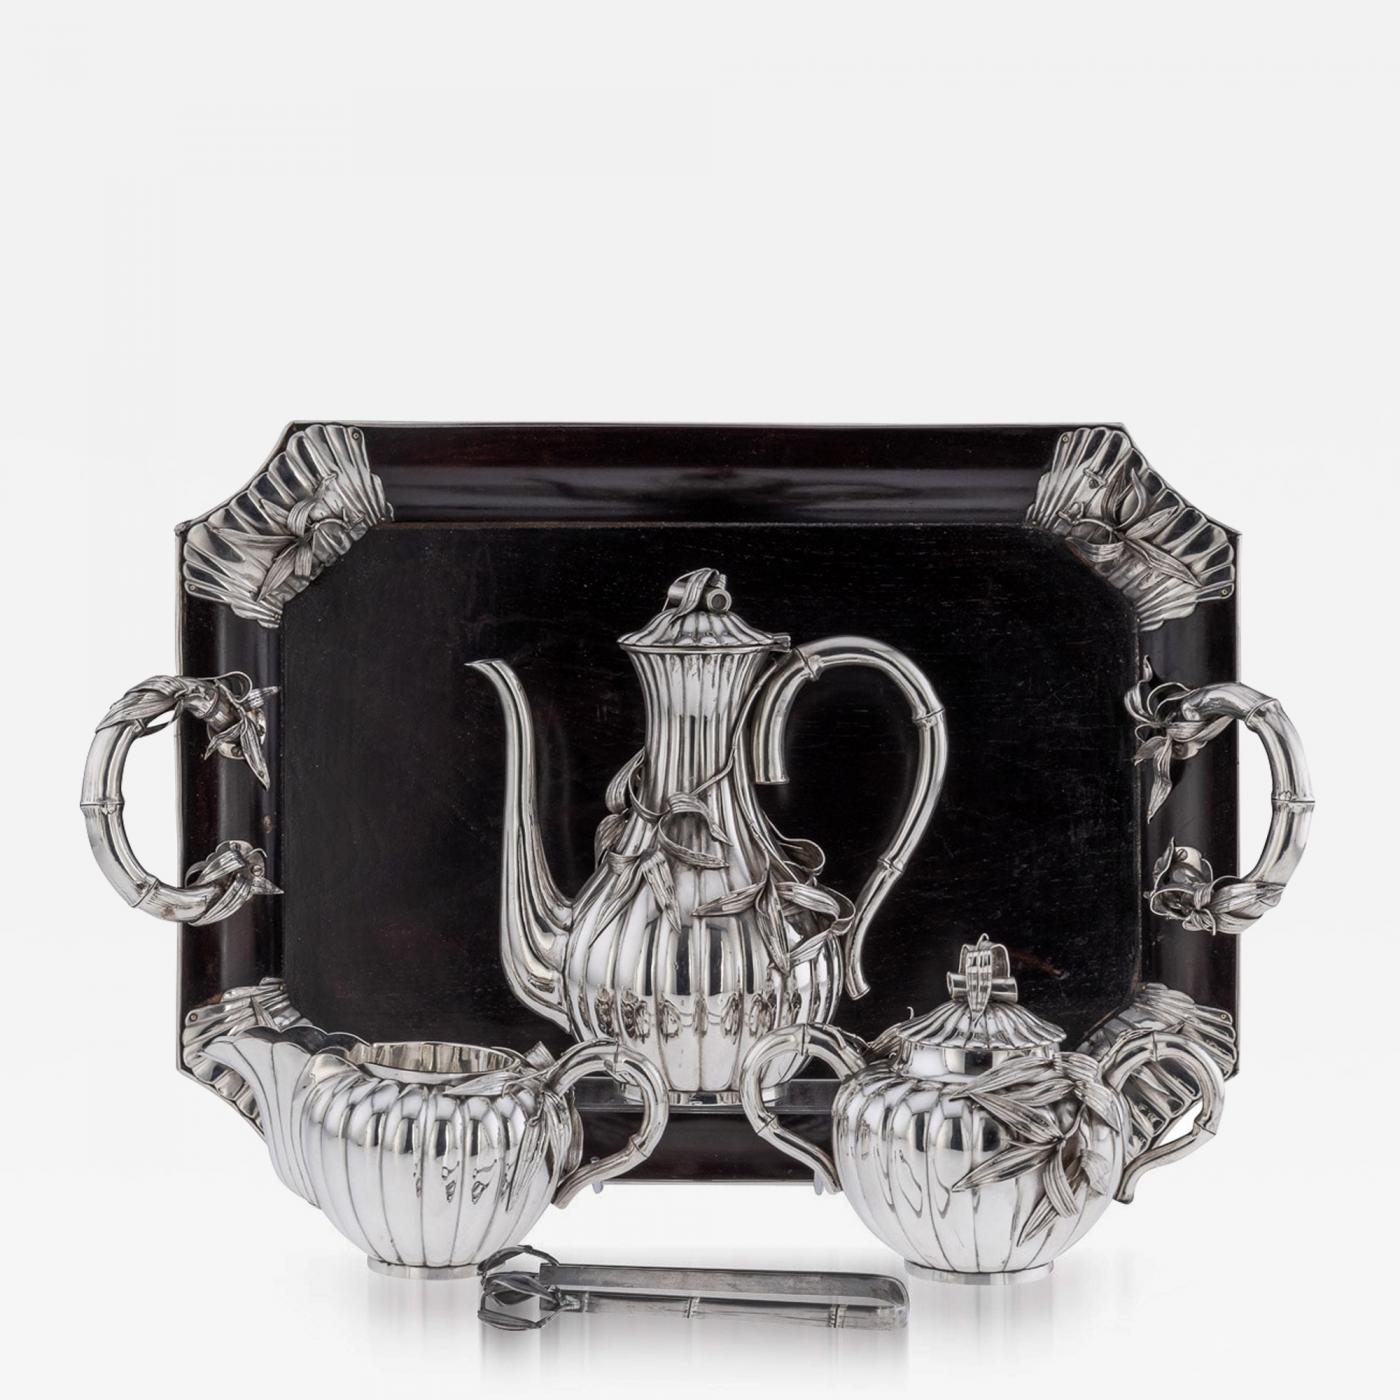 https://cdn.incollect.com/sites/default/files/zoom/20th-Century-Japanese-Solid-Silver-Coffee-Set-On-Tray-Arthur-Bond-c-1900-683727-3378478.jpg